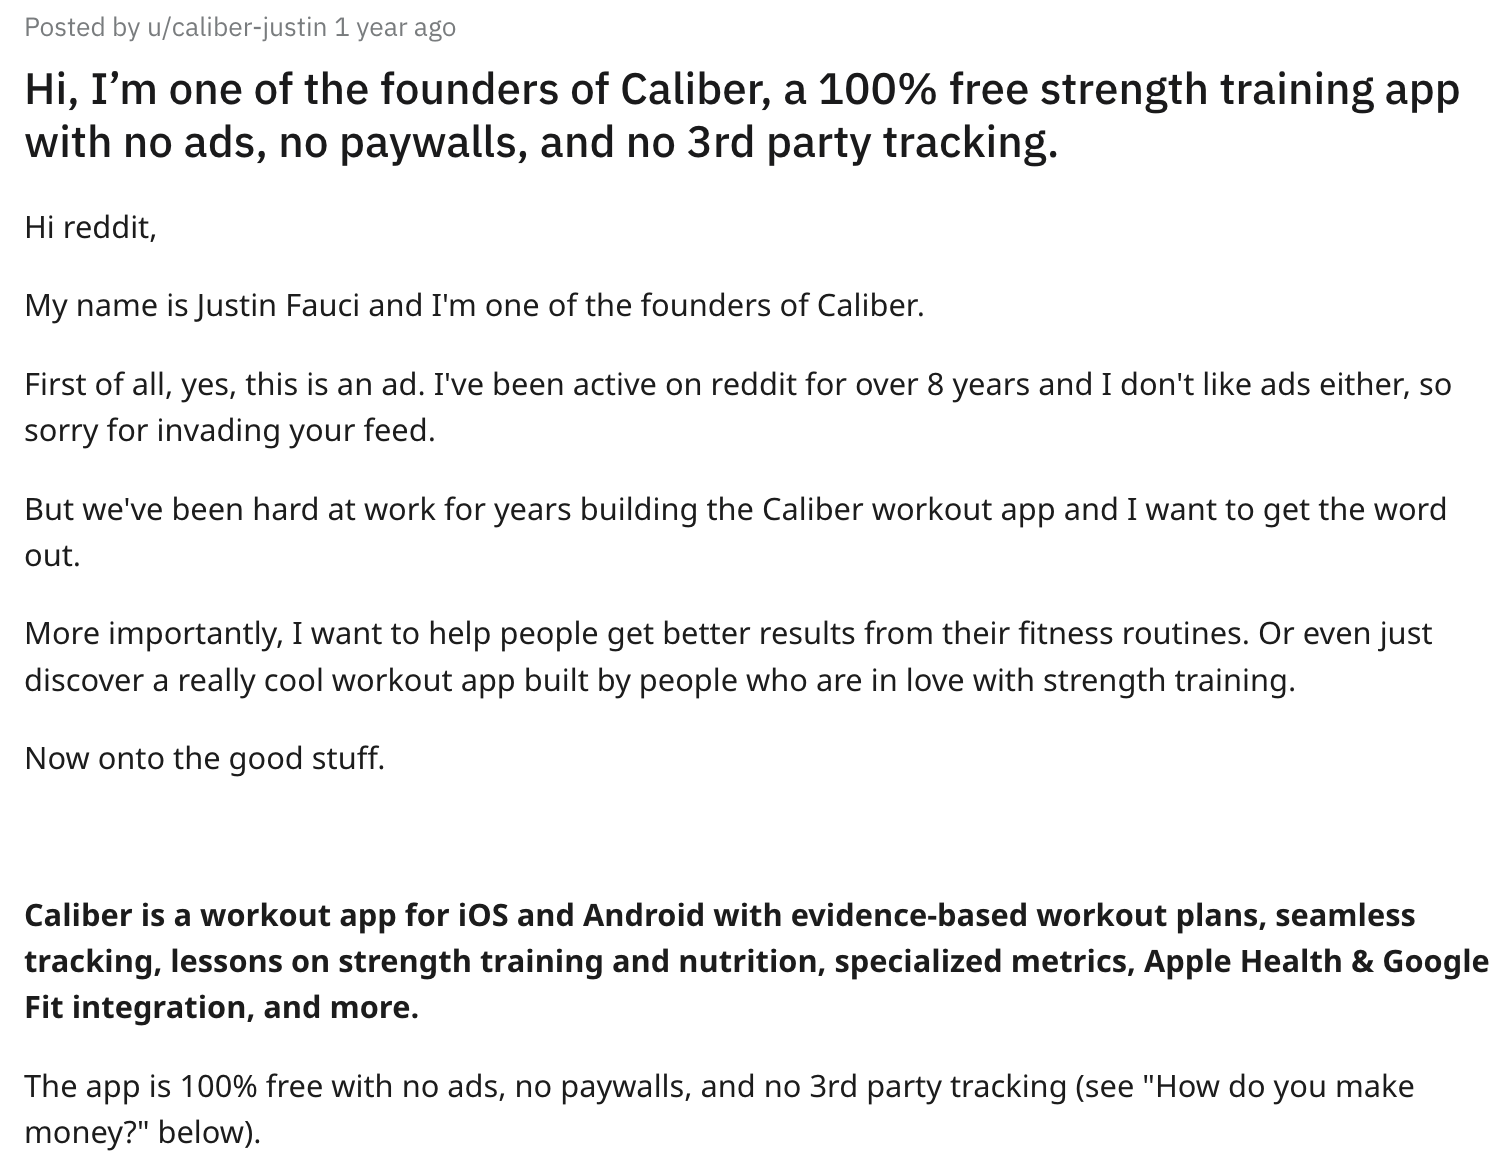 Caliber's Reddit ad copy from Justin Fauci, one of the founders